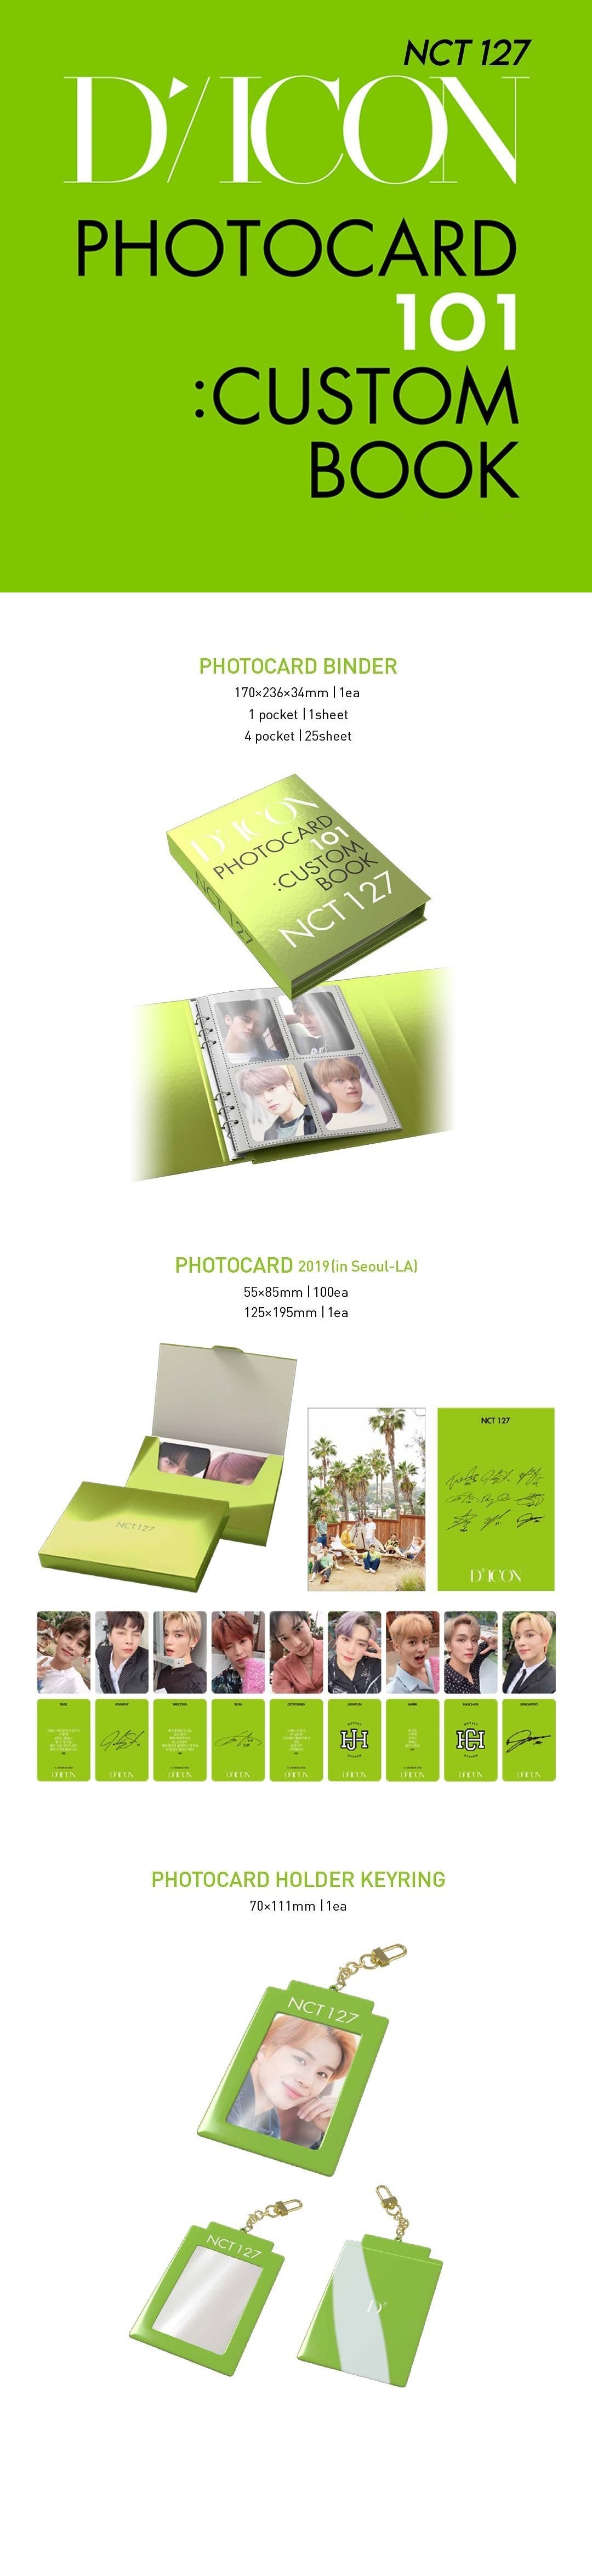 NCT 127 – DICON PHOTOCARD 101: INDIVIDUELLES BUCH